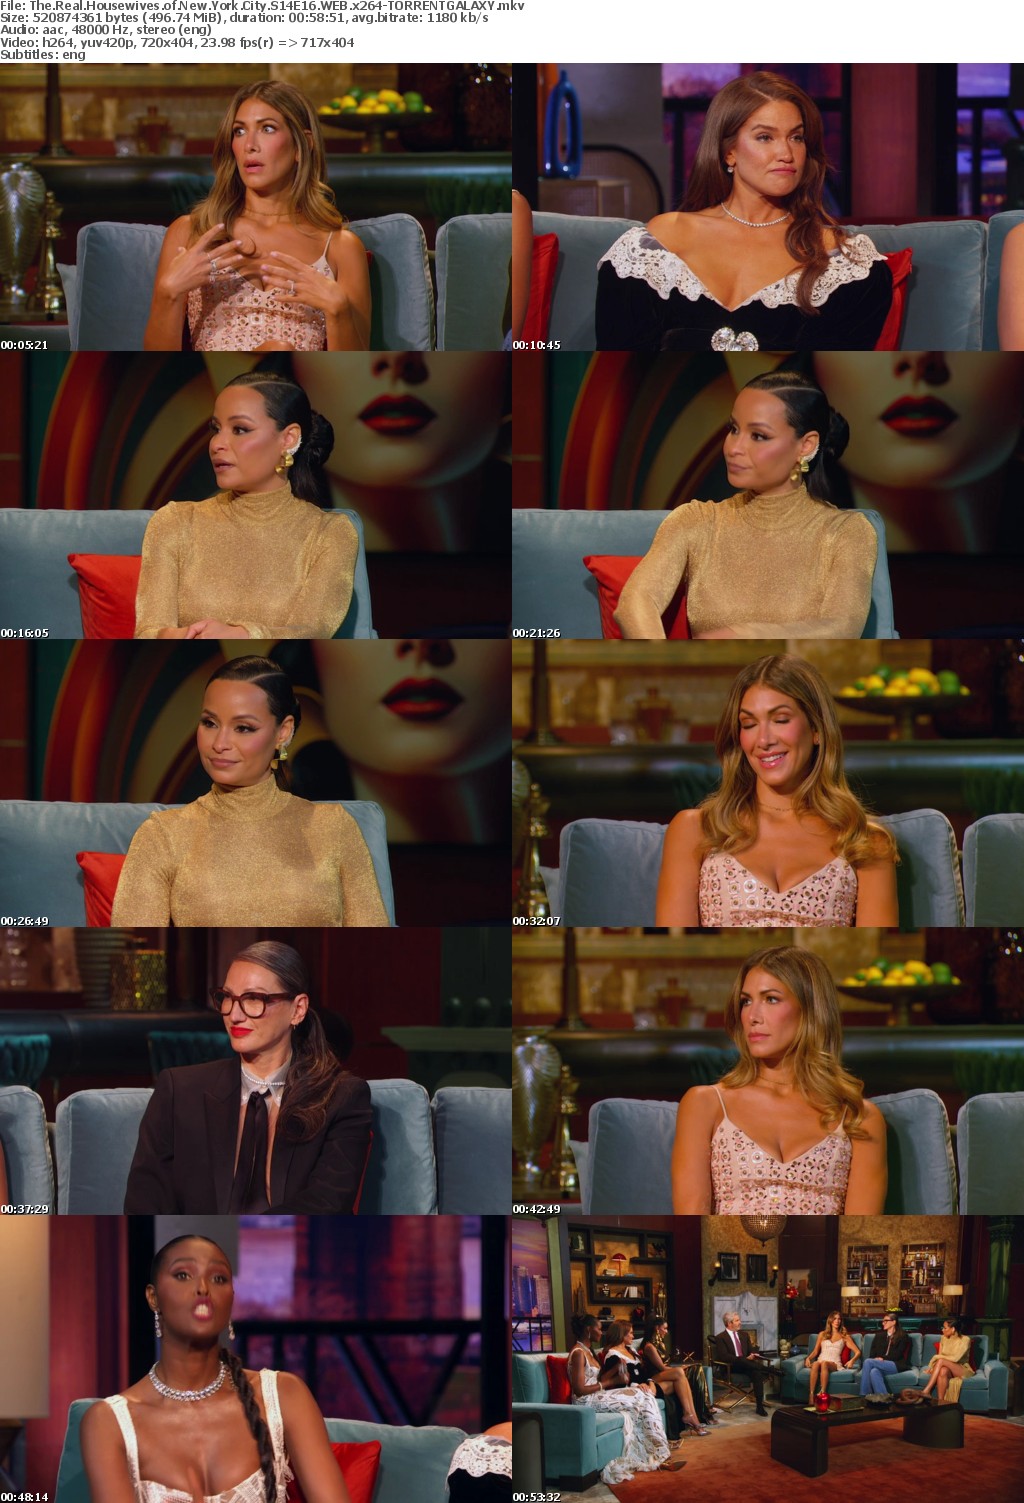 The Real Housewives of New York City S14E16 WEB x264-GALAXY